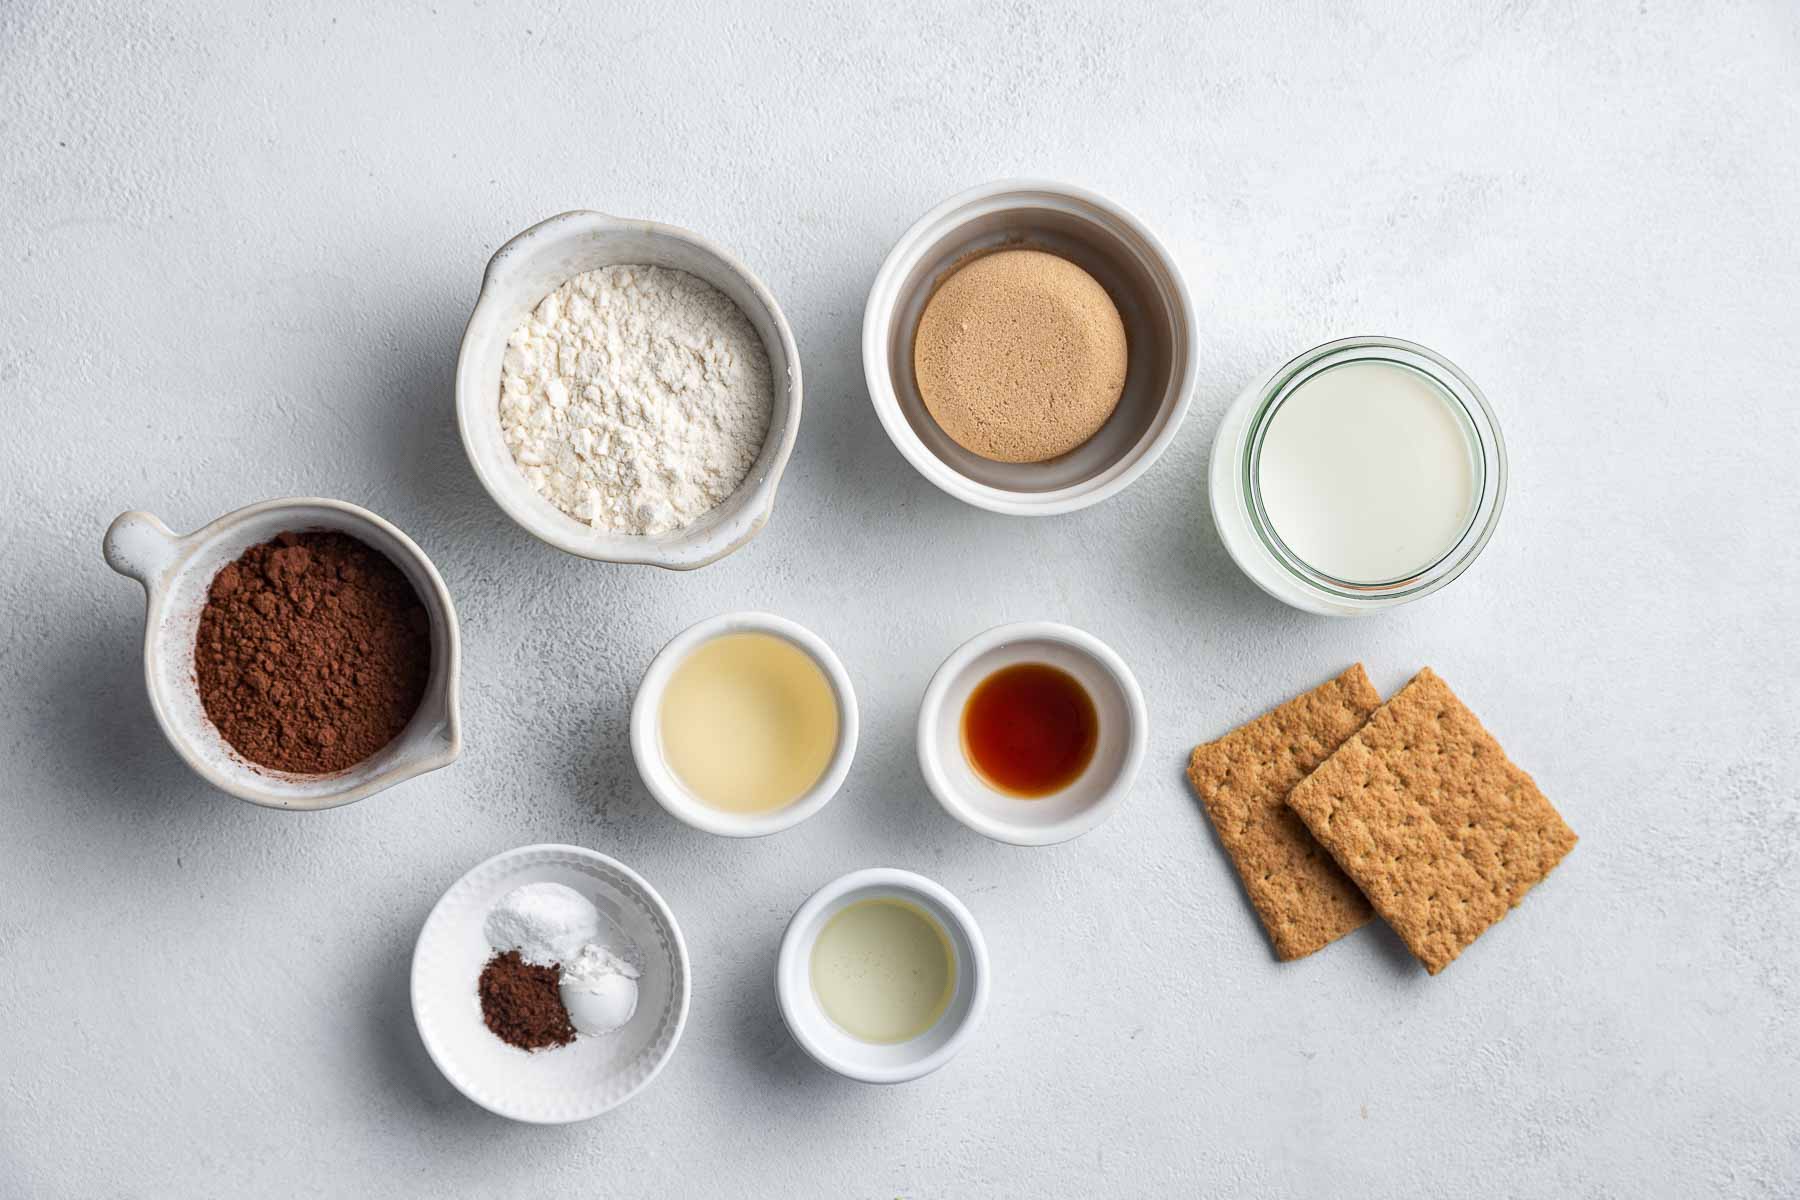 Ingredients for chocolate graham cracker cupcakes in small bowls on table.